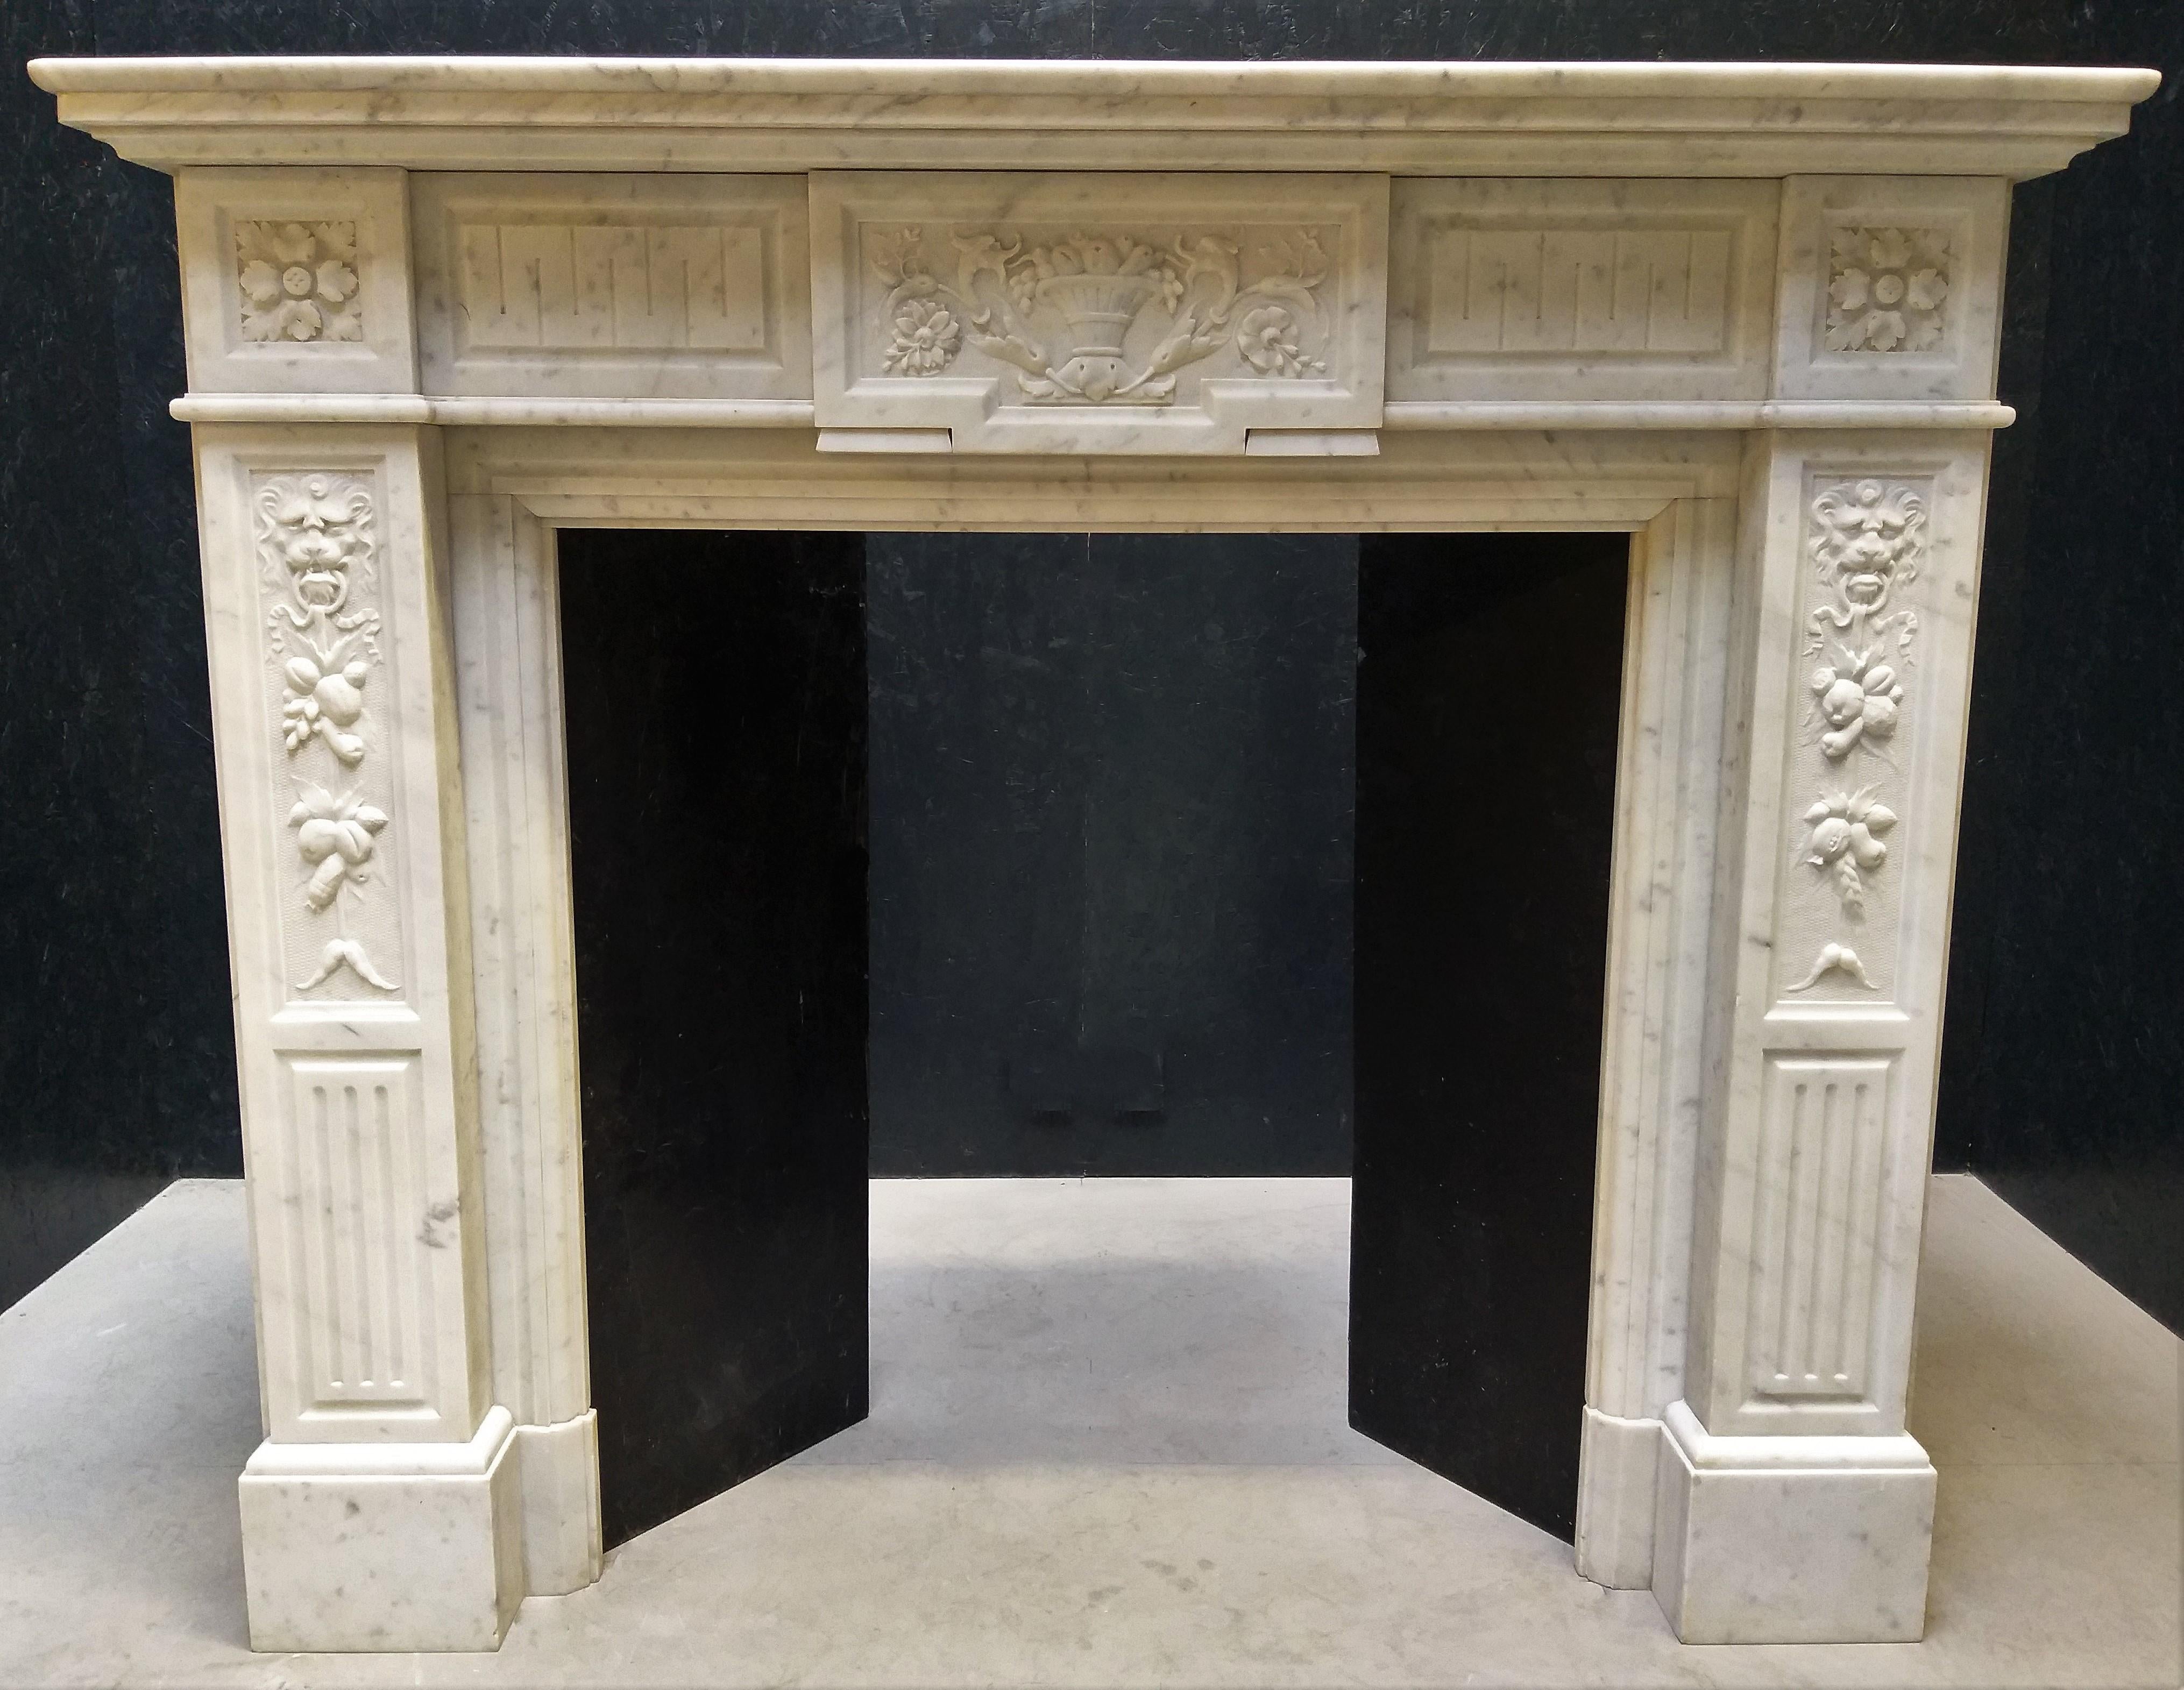 This neo-classical, white marble fireplace has the simplicity of Louis XVI lines with several Renaissance motifs. The various ornamentation all-over the front and jambs are very typical for the second half of the 19th century. The frieze and jambs